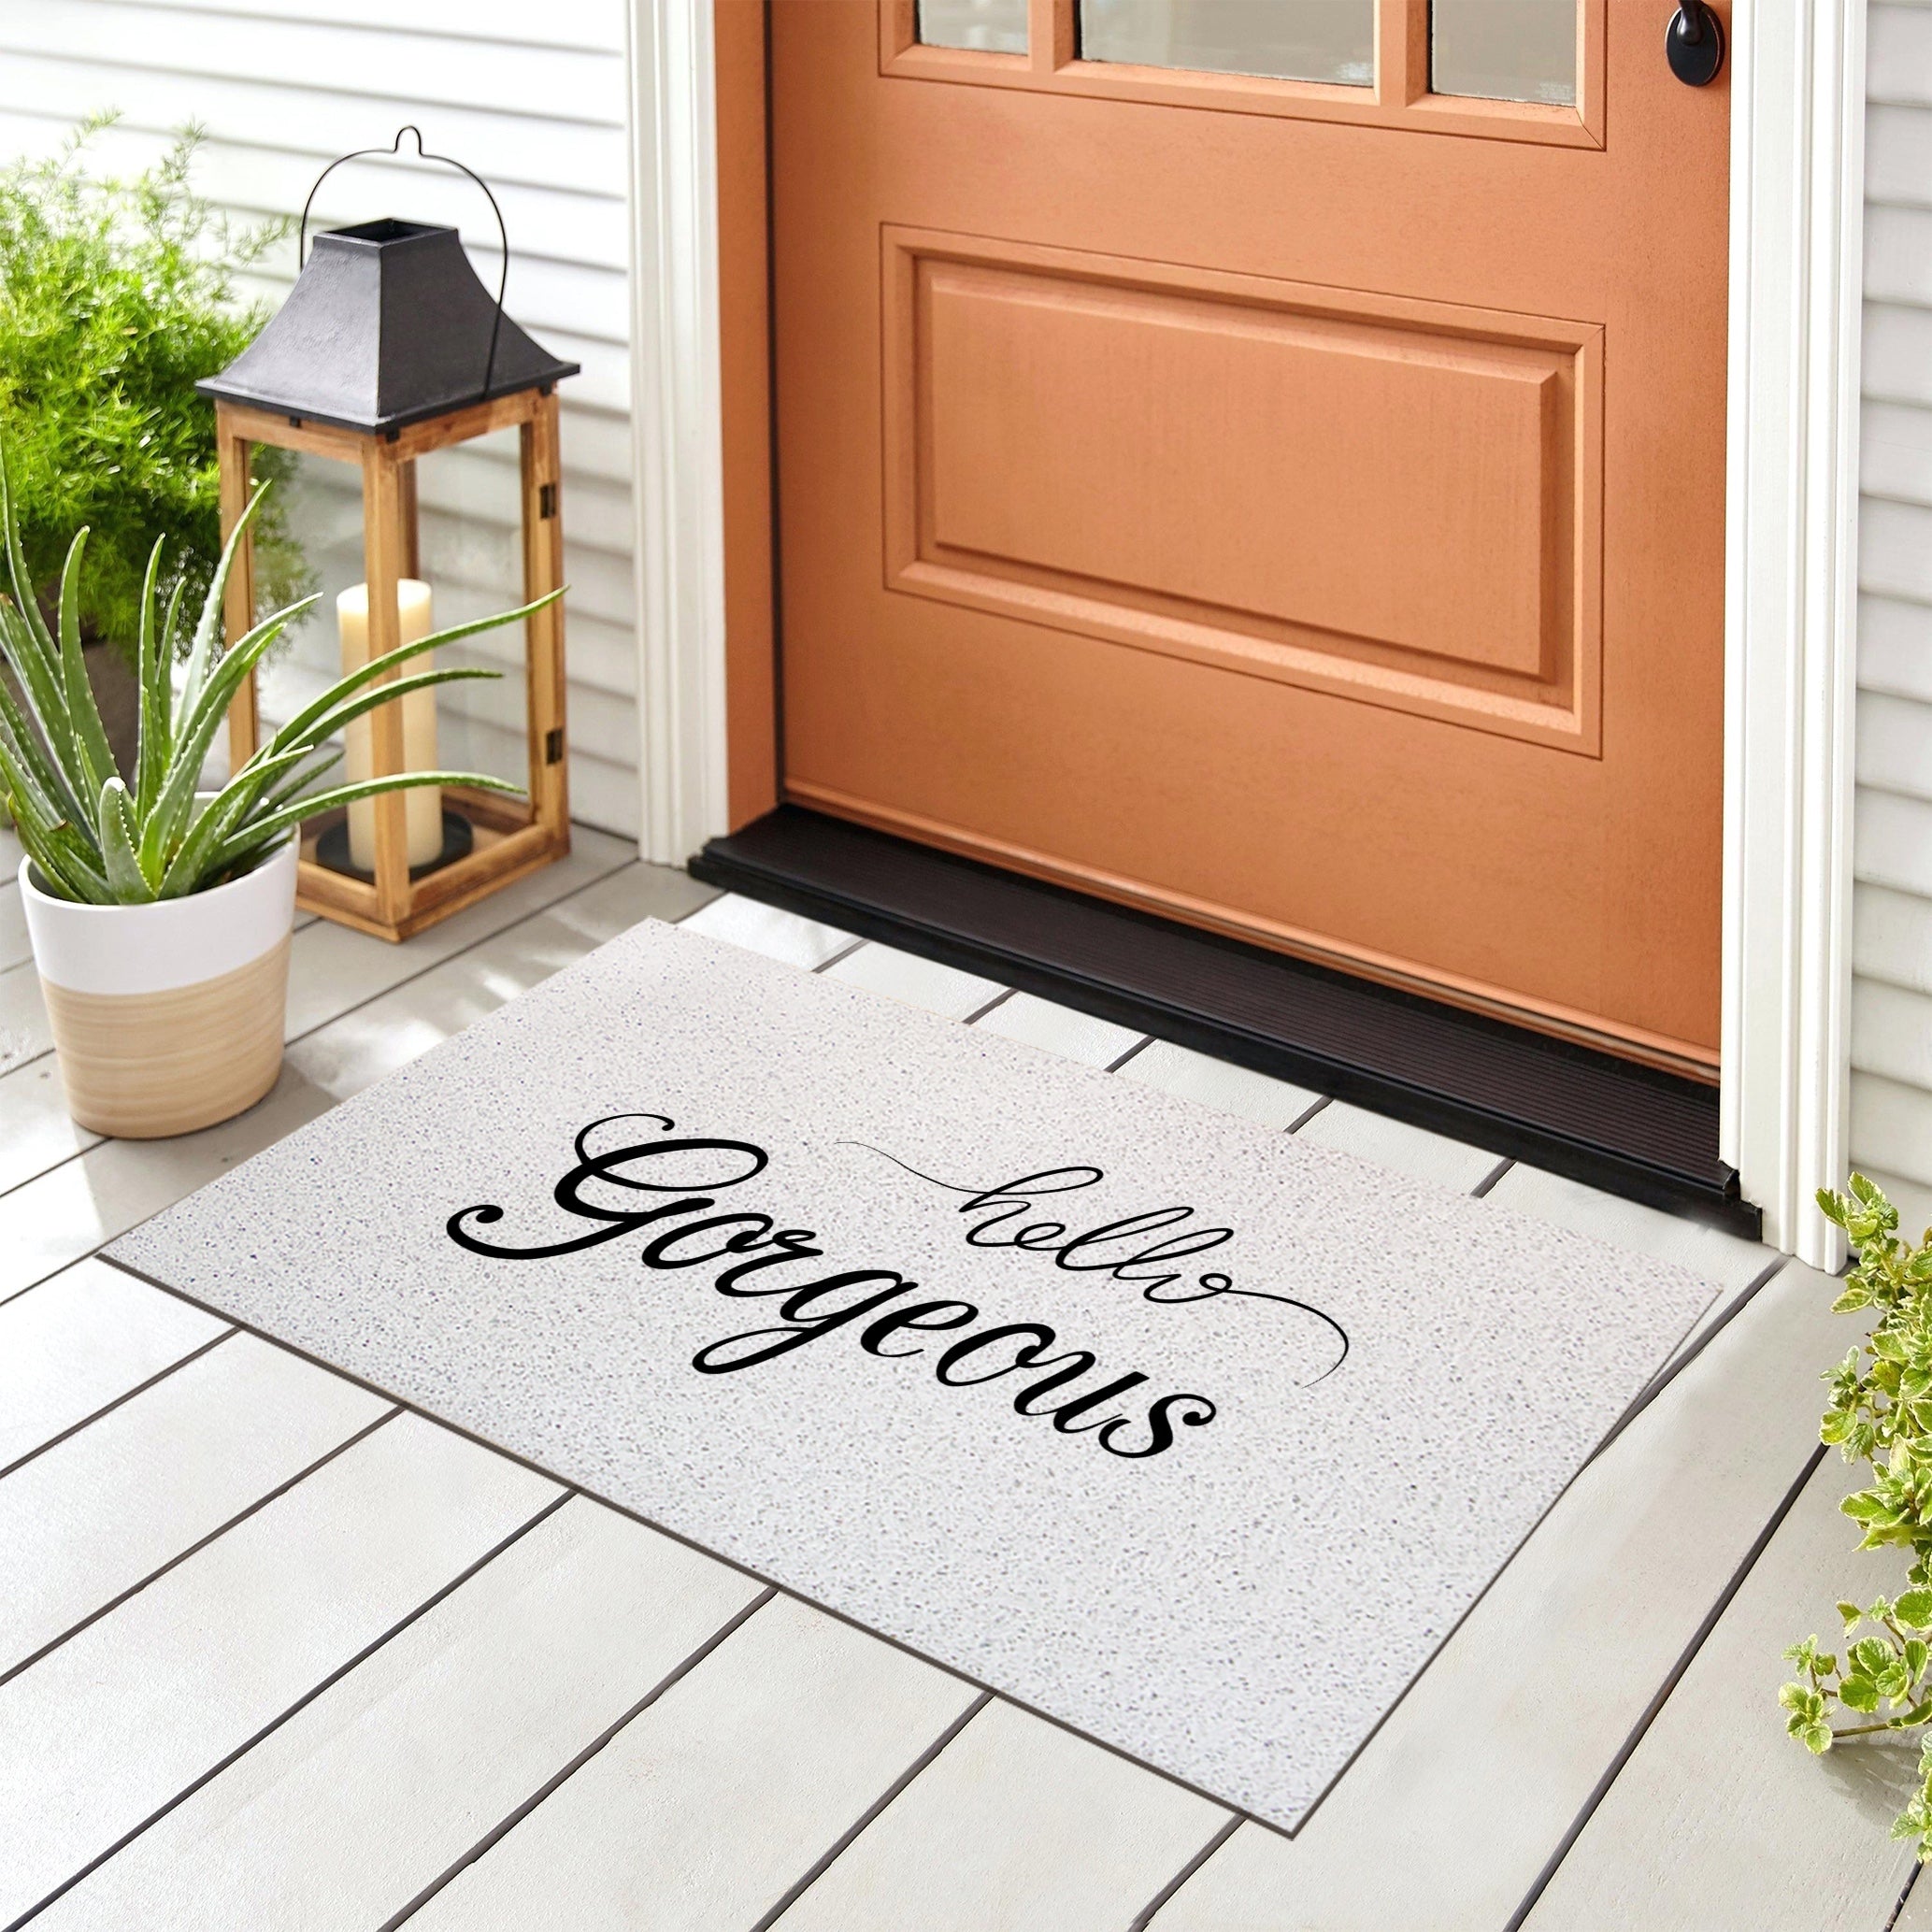 Feblilac Hello Gorgeous White Ground Door mat, Quotation Welcome Doormat, Anti Skid PVC Coil Outdoor Mats, Front Mat for Home, Washable Entryway Doormat - Feblilac® Mat